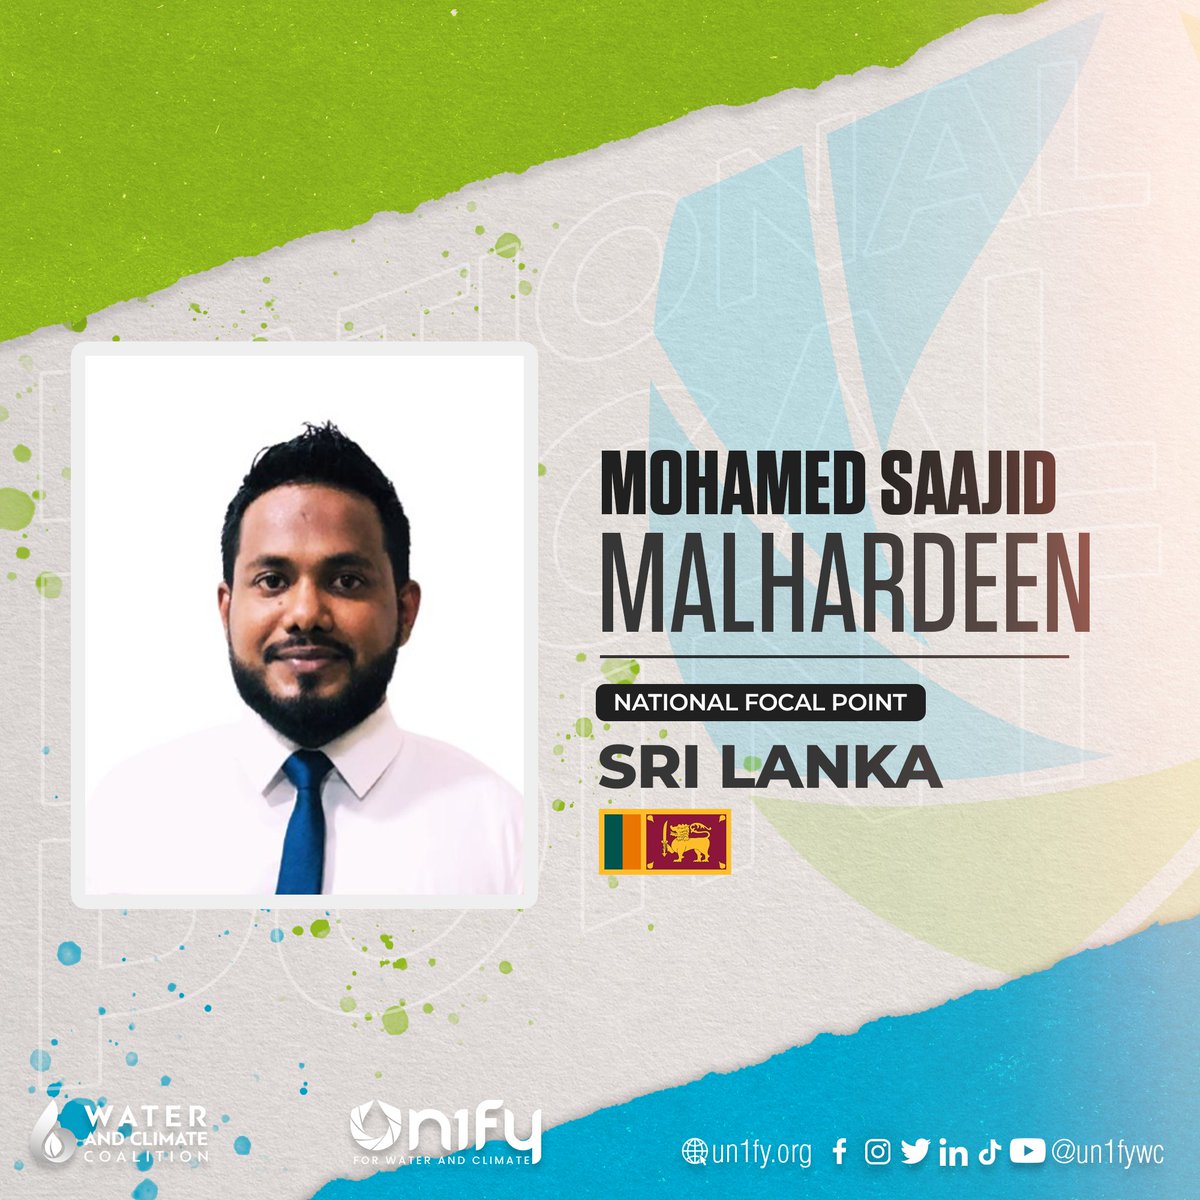 Introducing our National Focal Points for Sri Lanka, Mohamed Mahroof Mohamed Shafras & Mohamed Saajid Malhardeen. Are you from Sri Lanka and willing to advocate for water and climate? You can reach them via email at srilanka@un1fy.org #un2023waterconference #WaterAction #un1fy